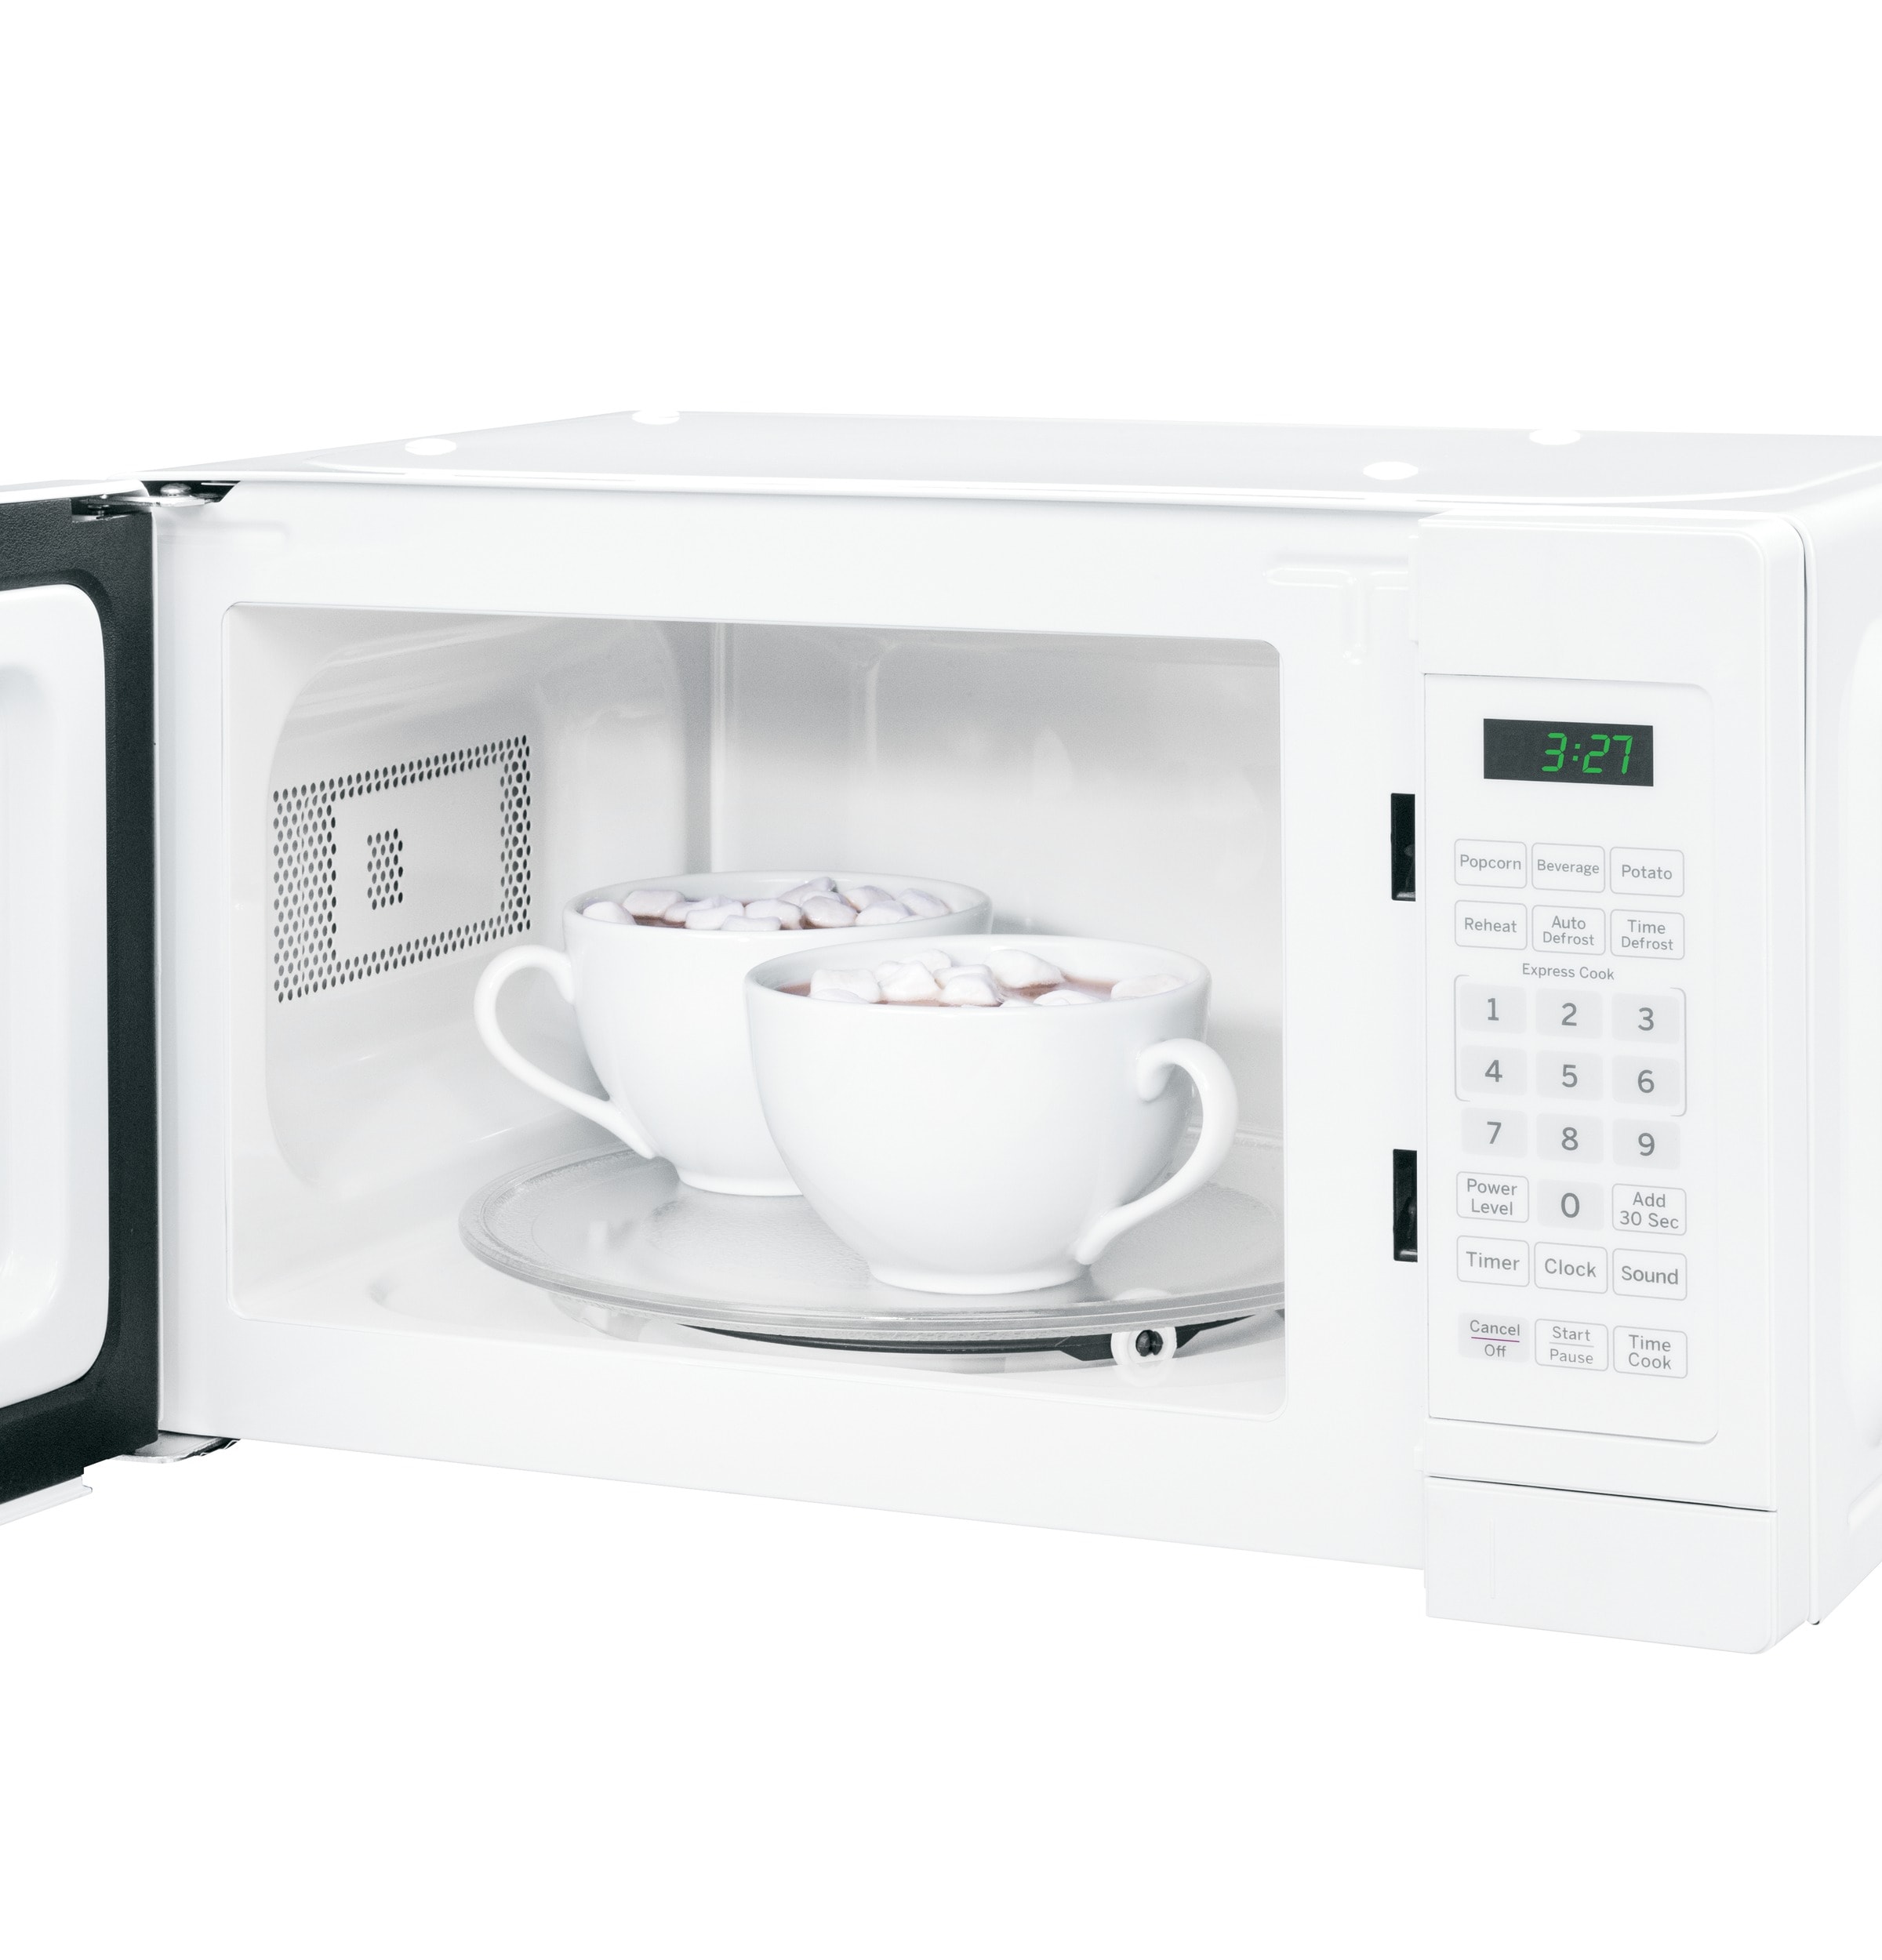 MO7191TW in White by Avanti in Bangor, ME - 0.7 cu. ft. Microwave Oven